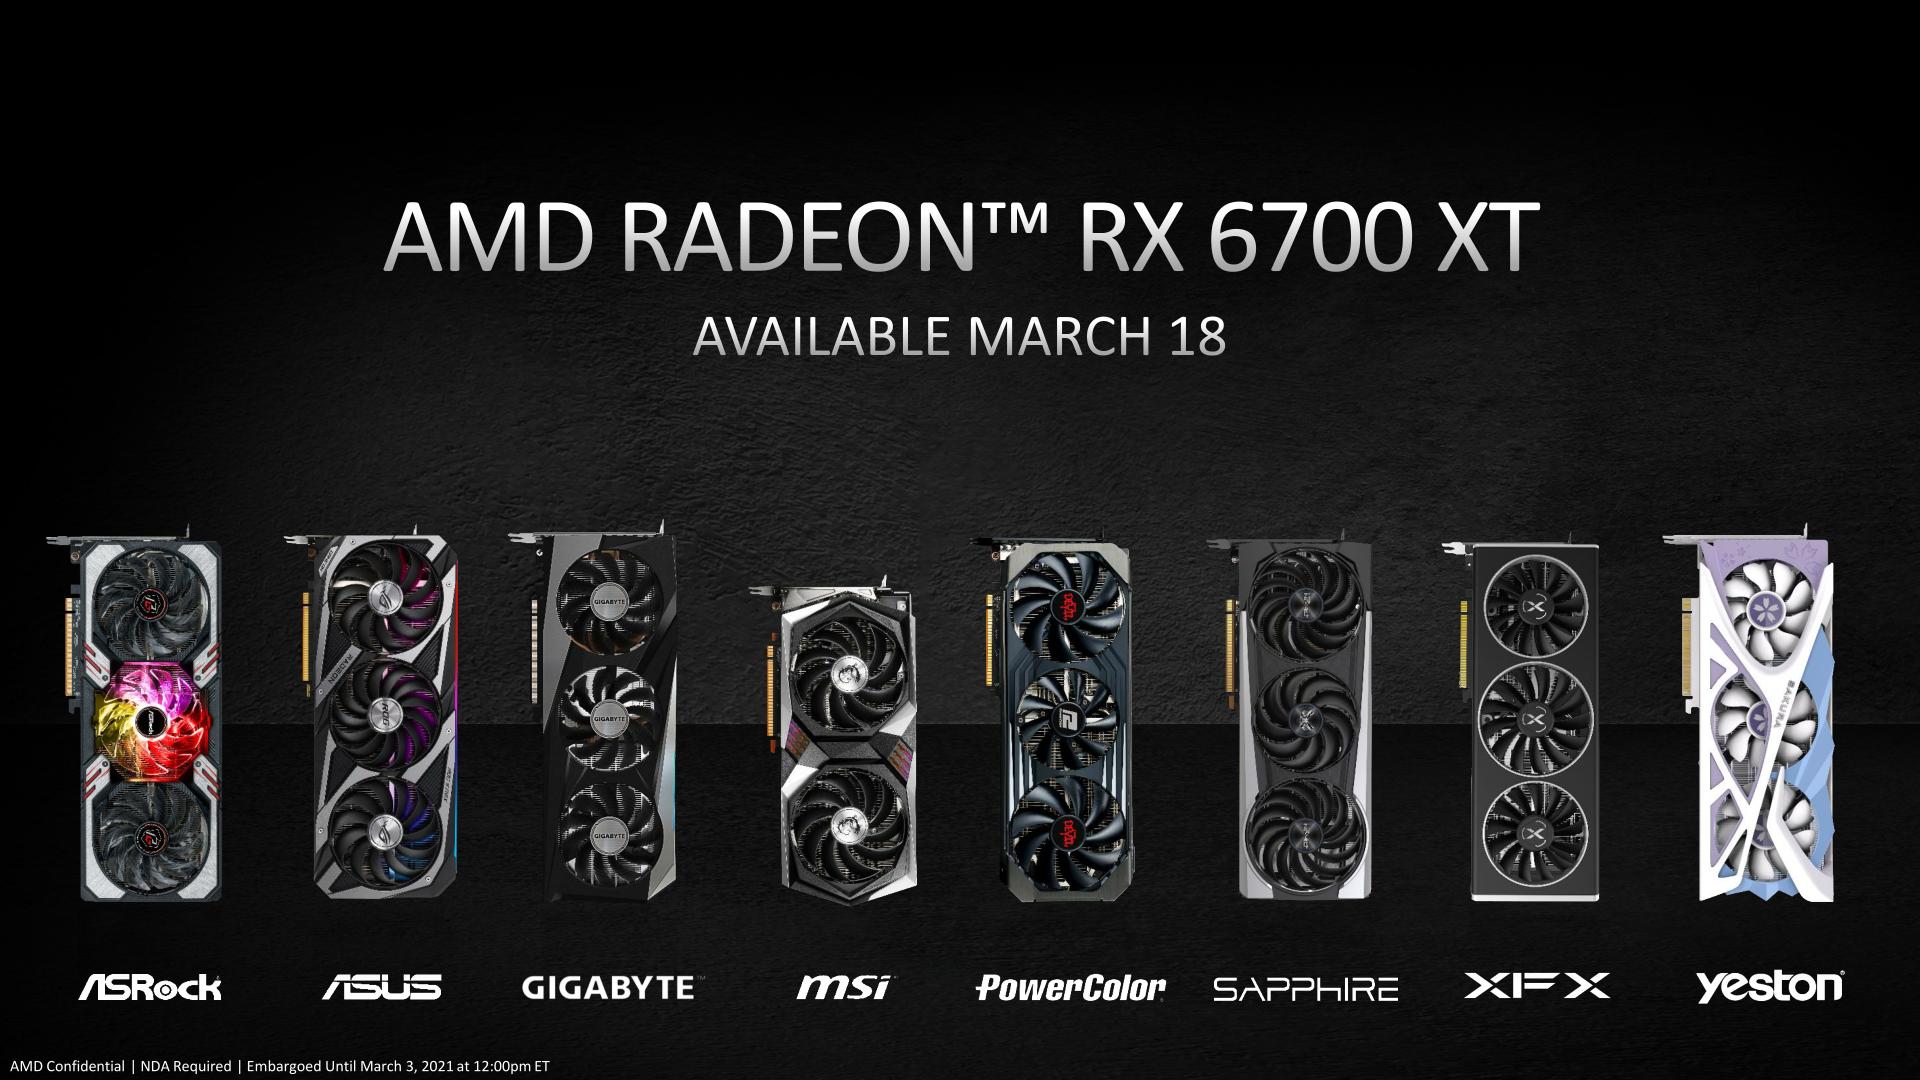 AMD Announces Radeon RX 6700 XT: RDNA2 For 1440p, Coming March 18th For $479